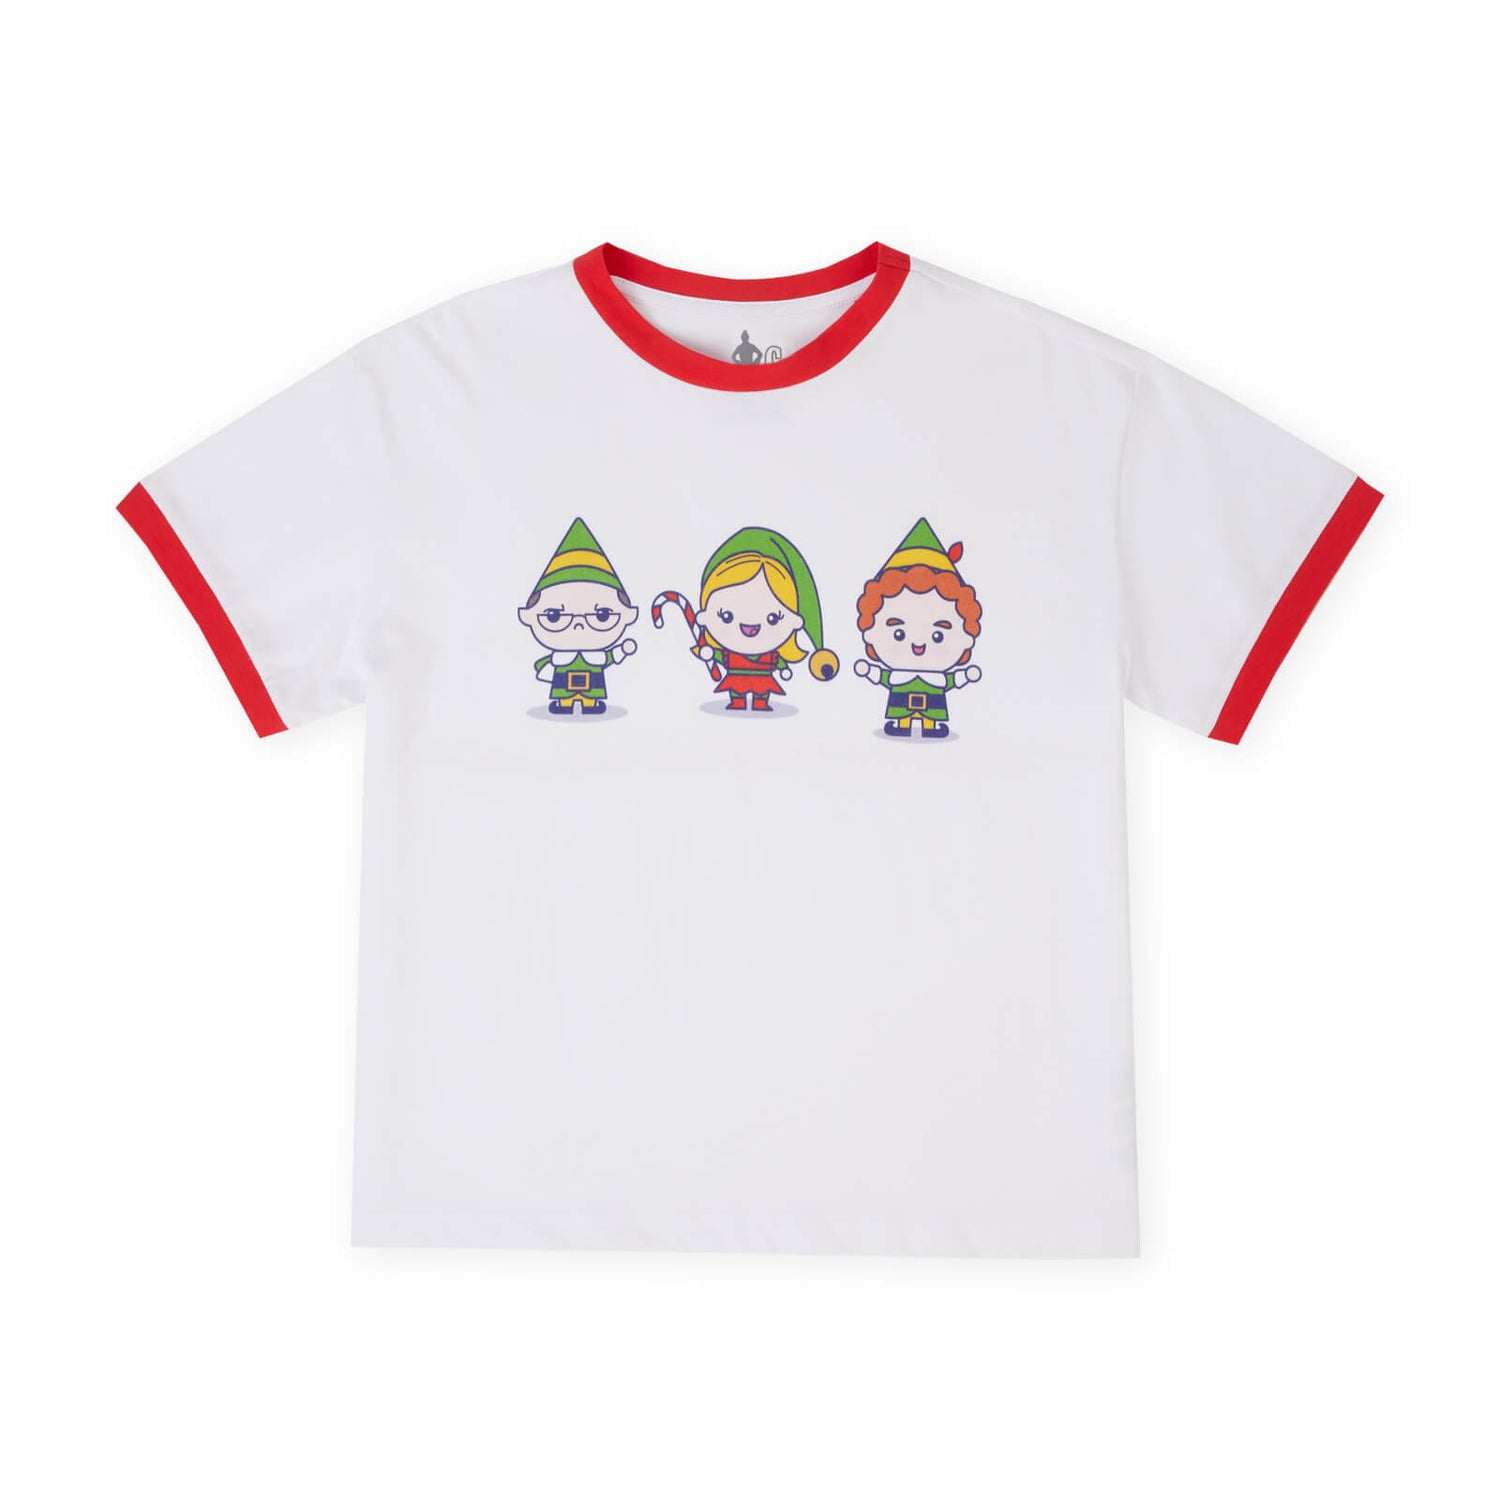 Elf Icon Women's Cropped Ringer T-Shirt - White Red